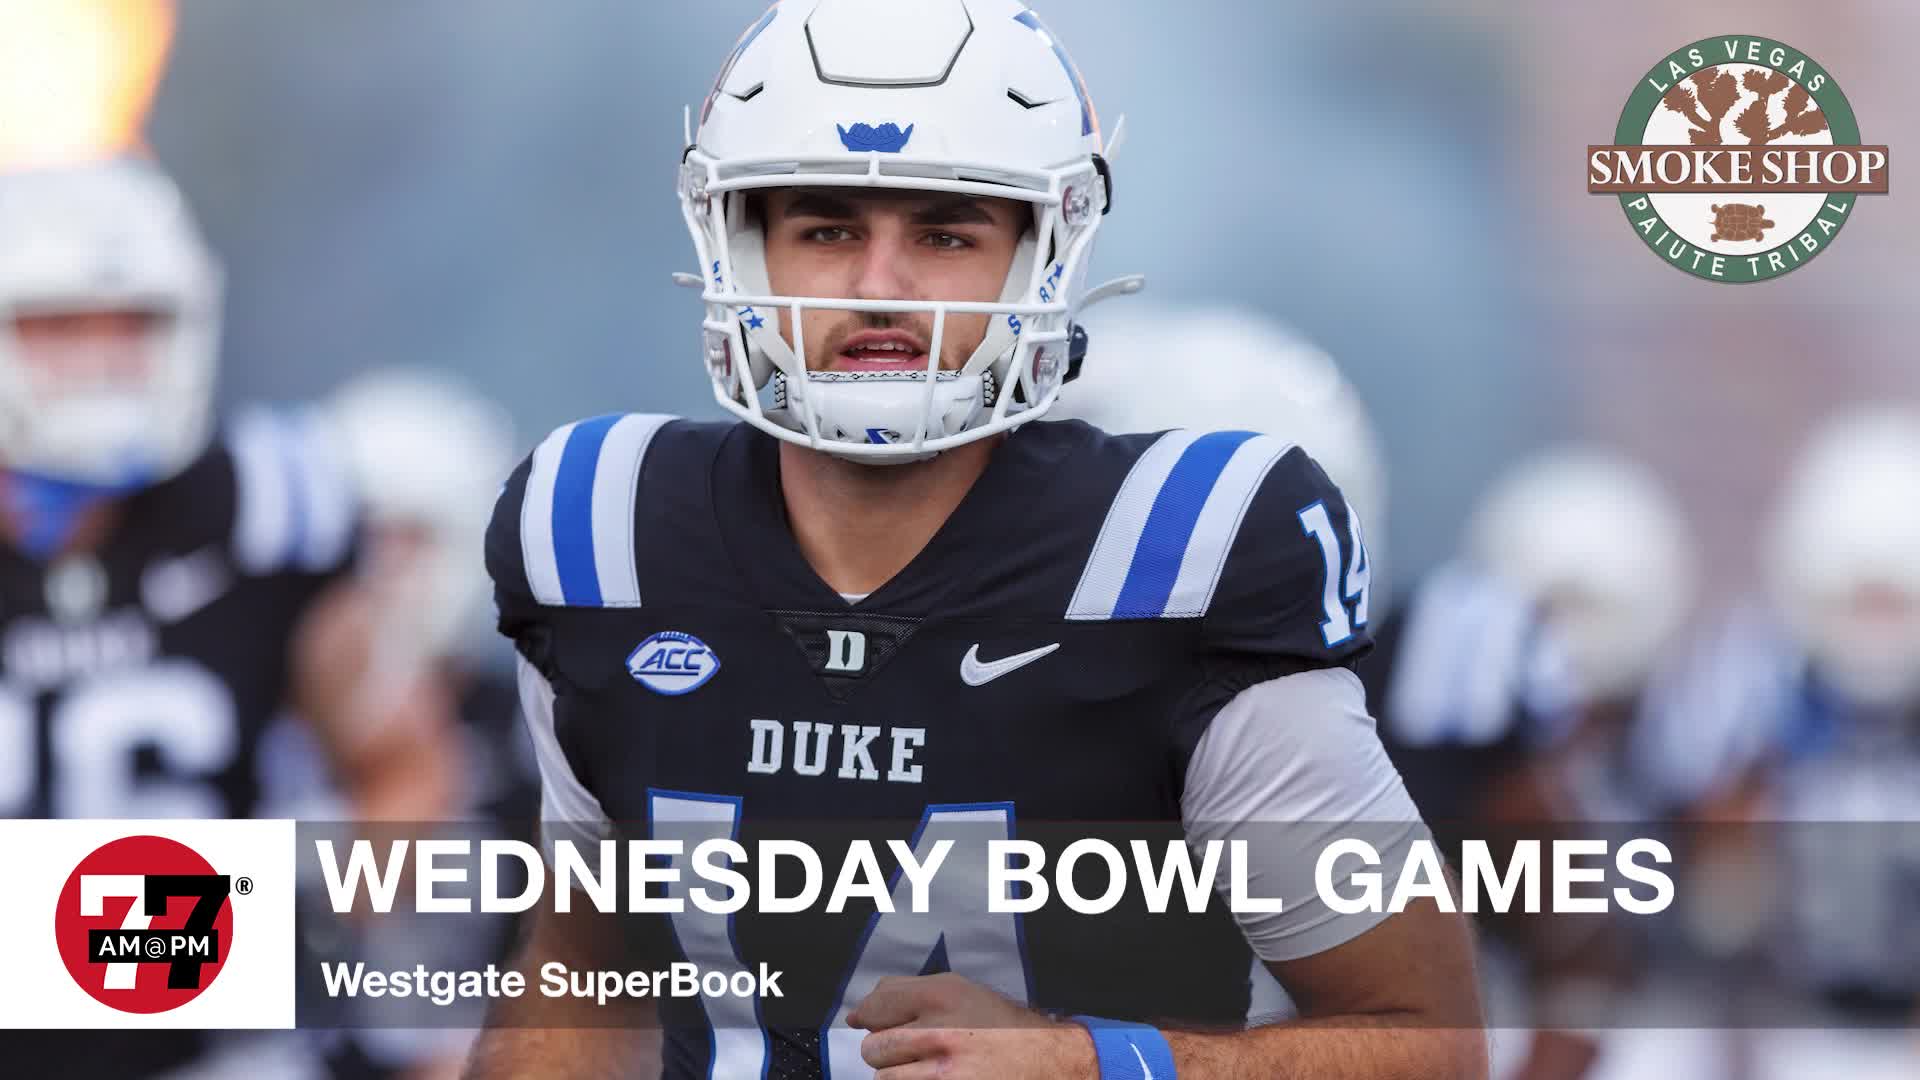 Wednesday bowl games